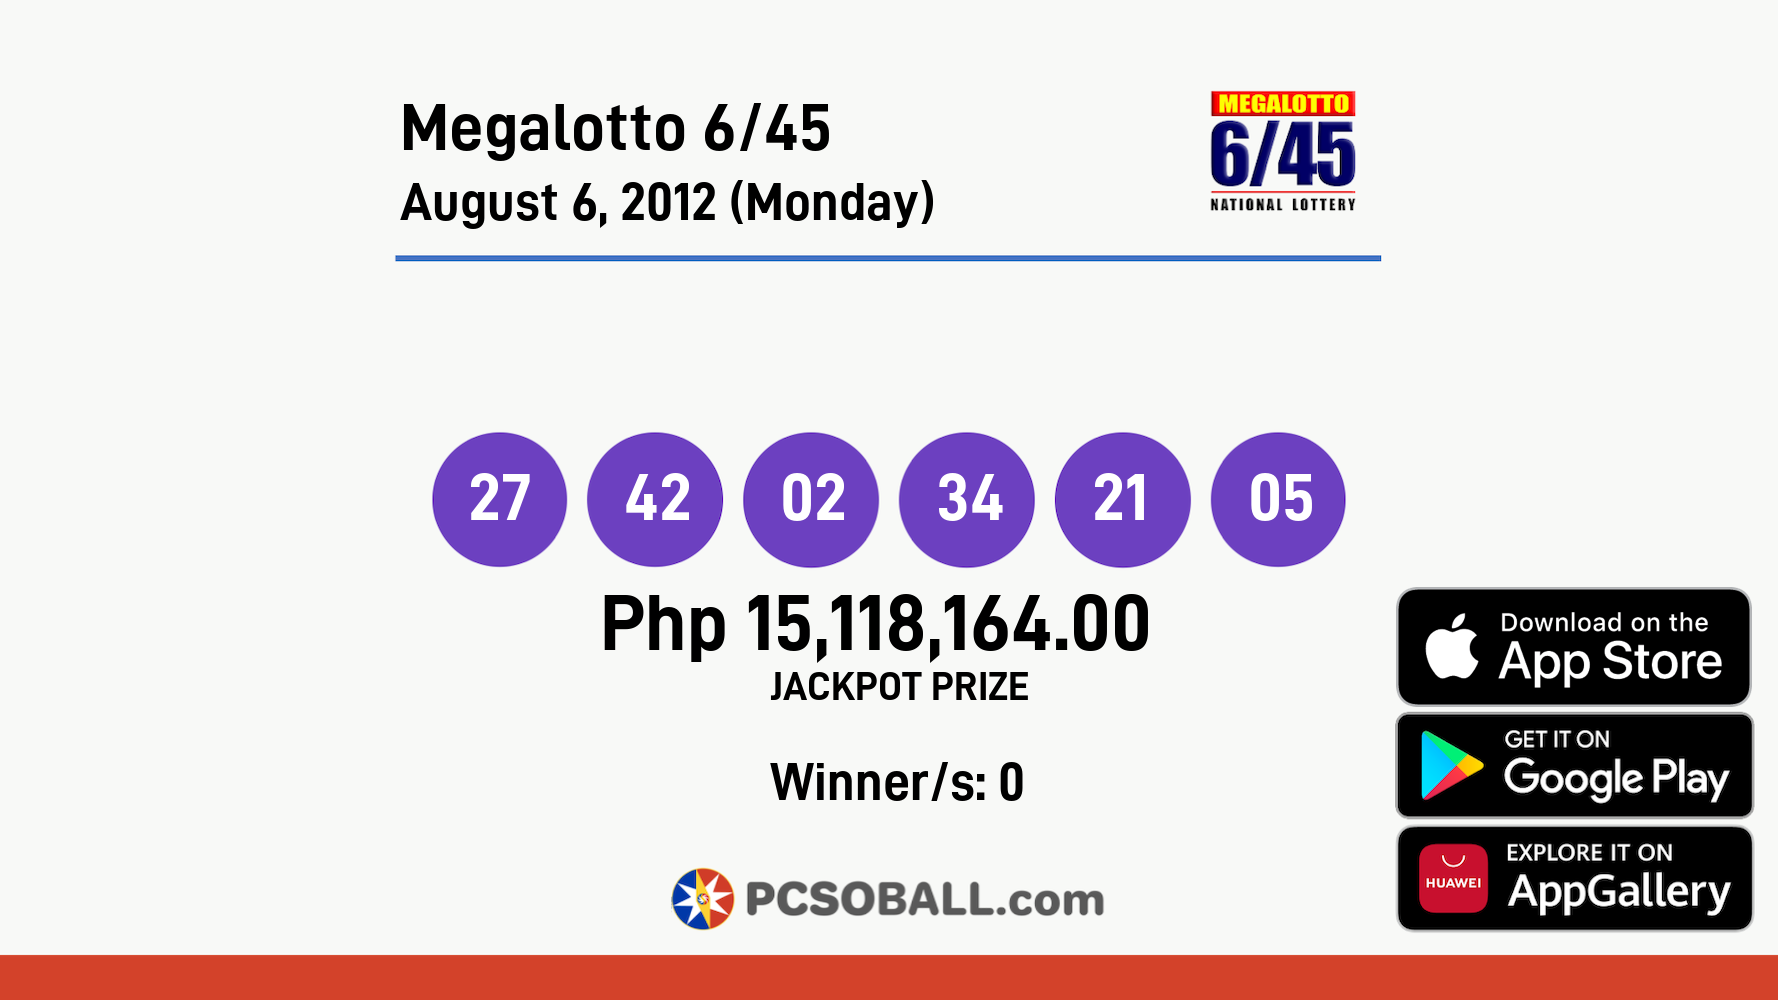 Megalotto 6/45 August 6, 2012 (Monday) Result